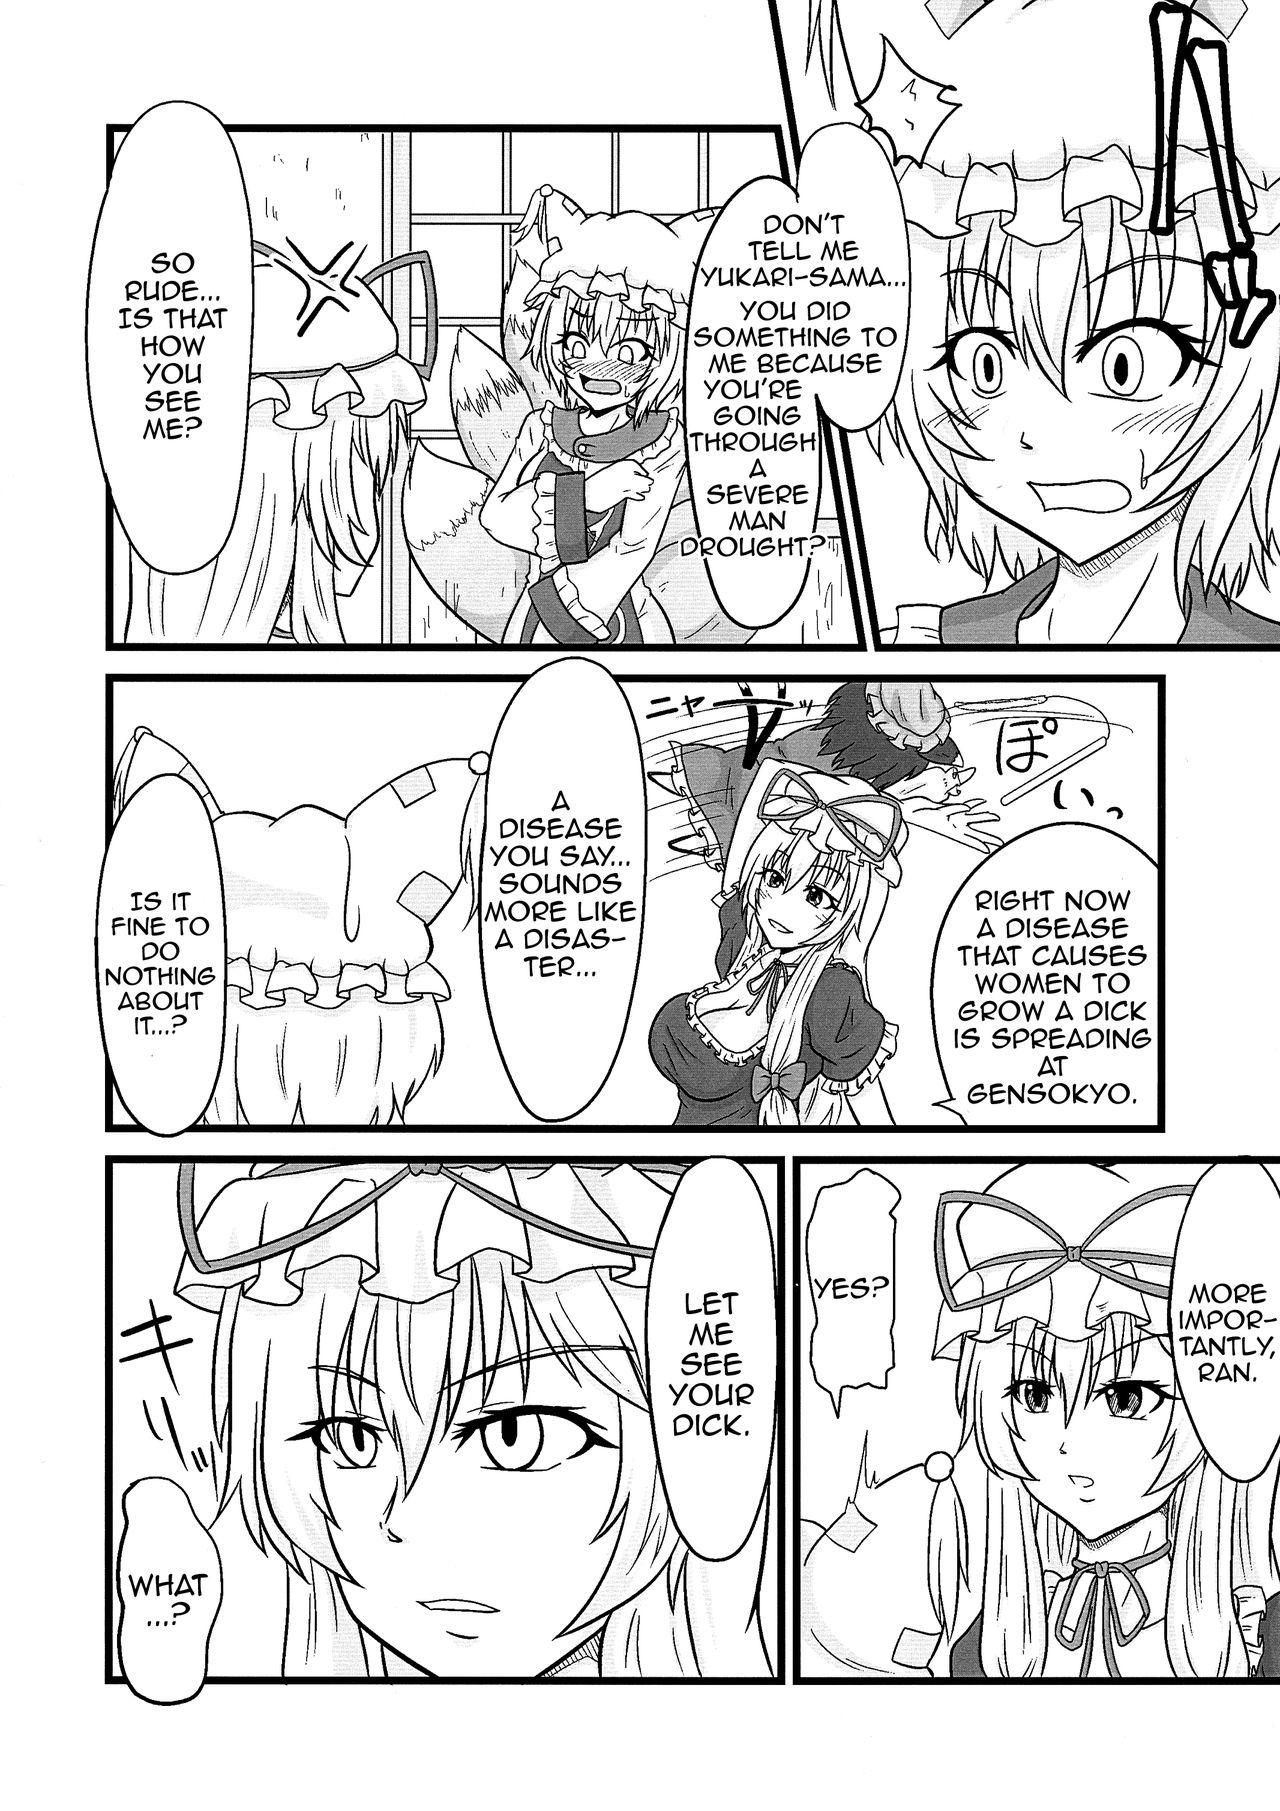 Virginity Ran < Chen - Touhou project Bubble Butt - Page 4